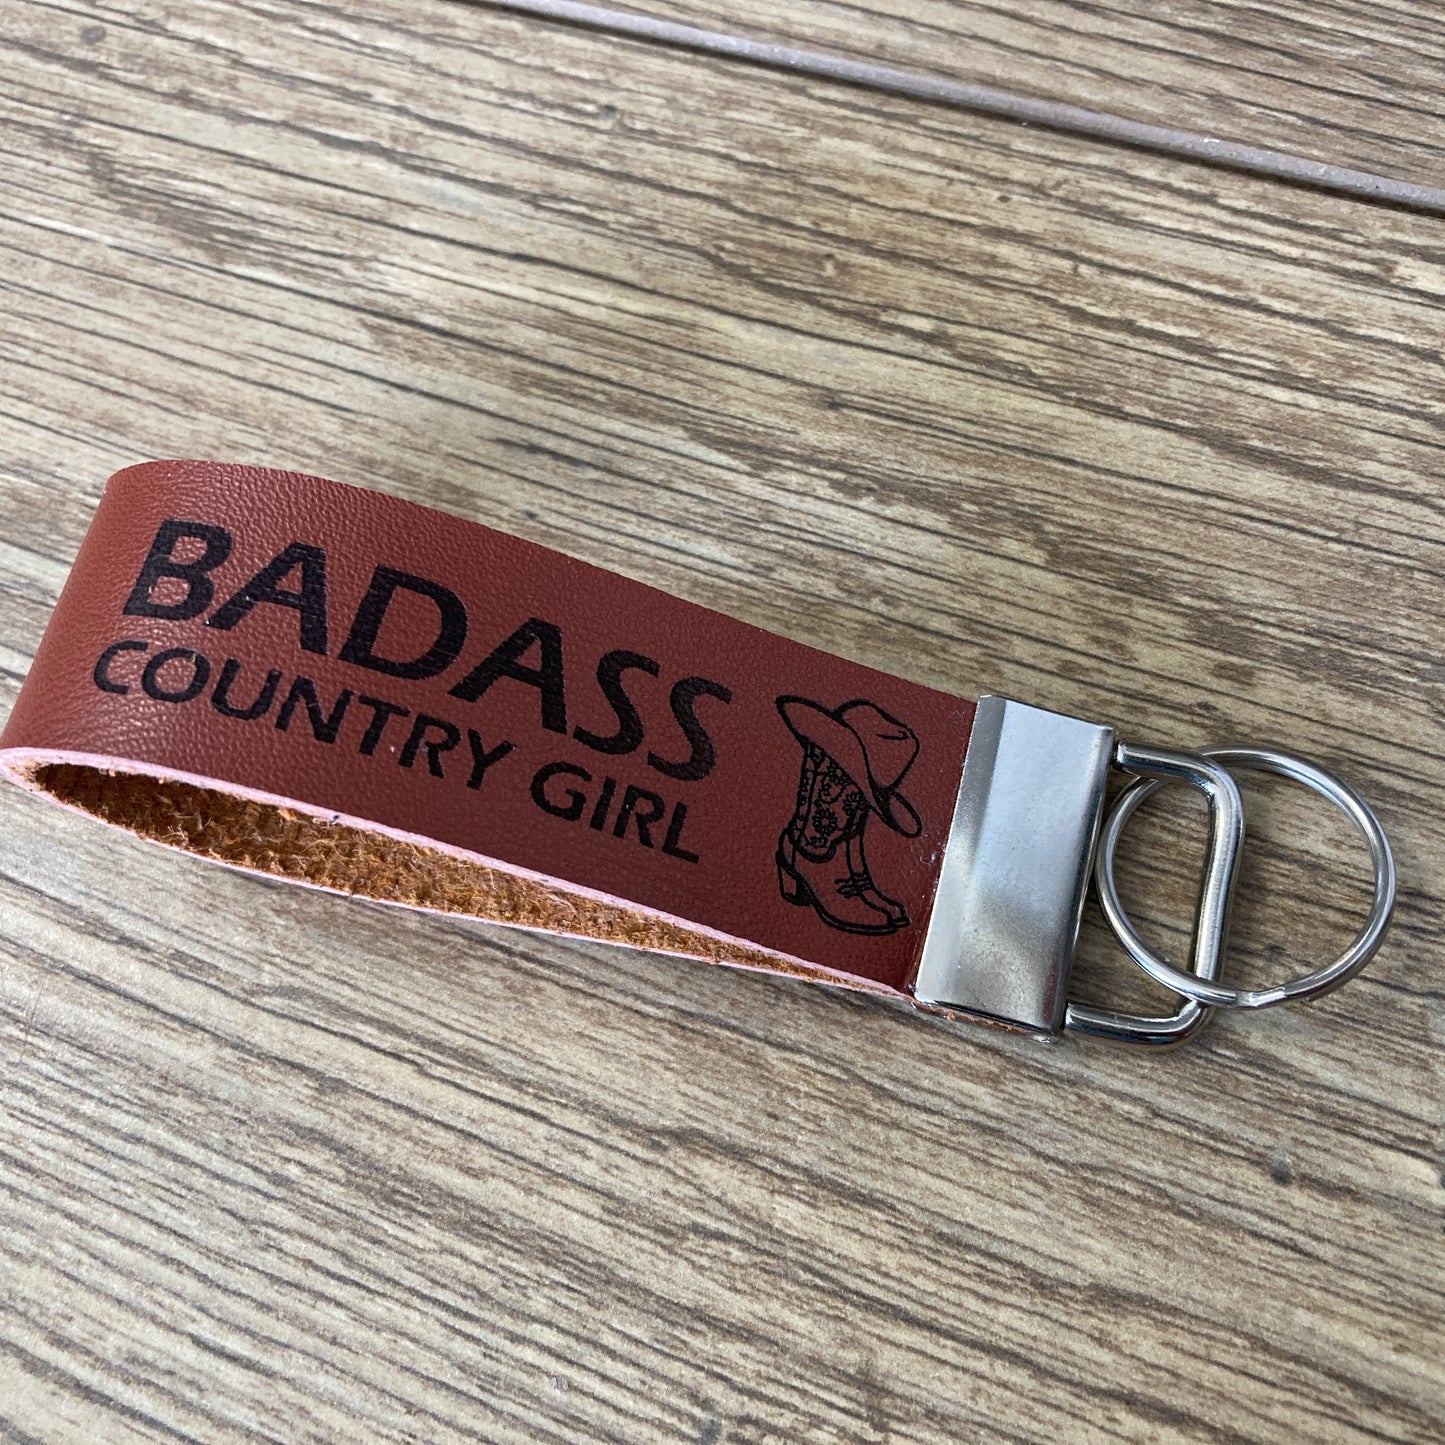 Badass Country Girl (Boots and Hat) Leather Keychain